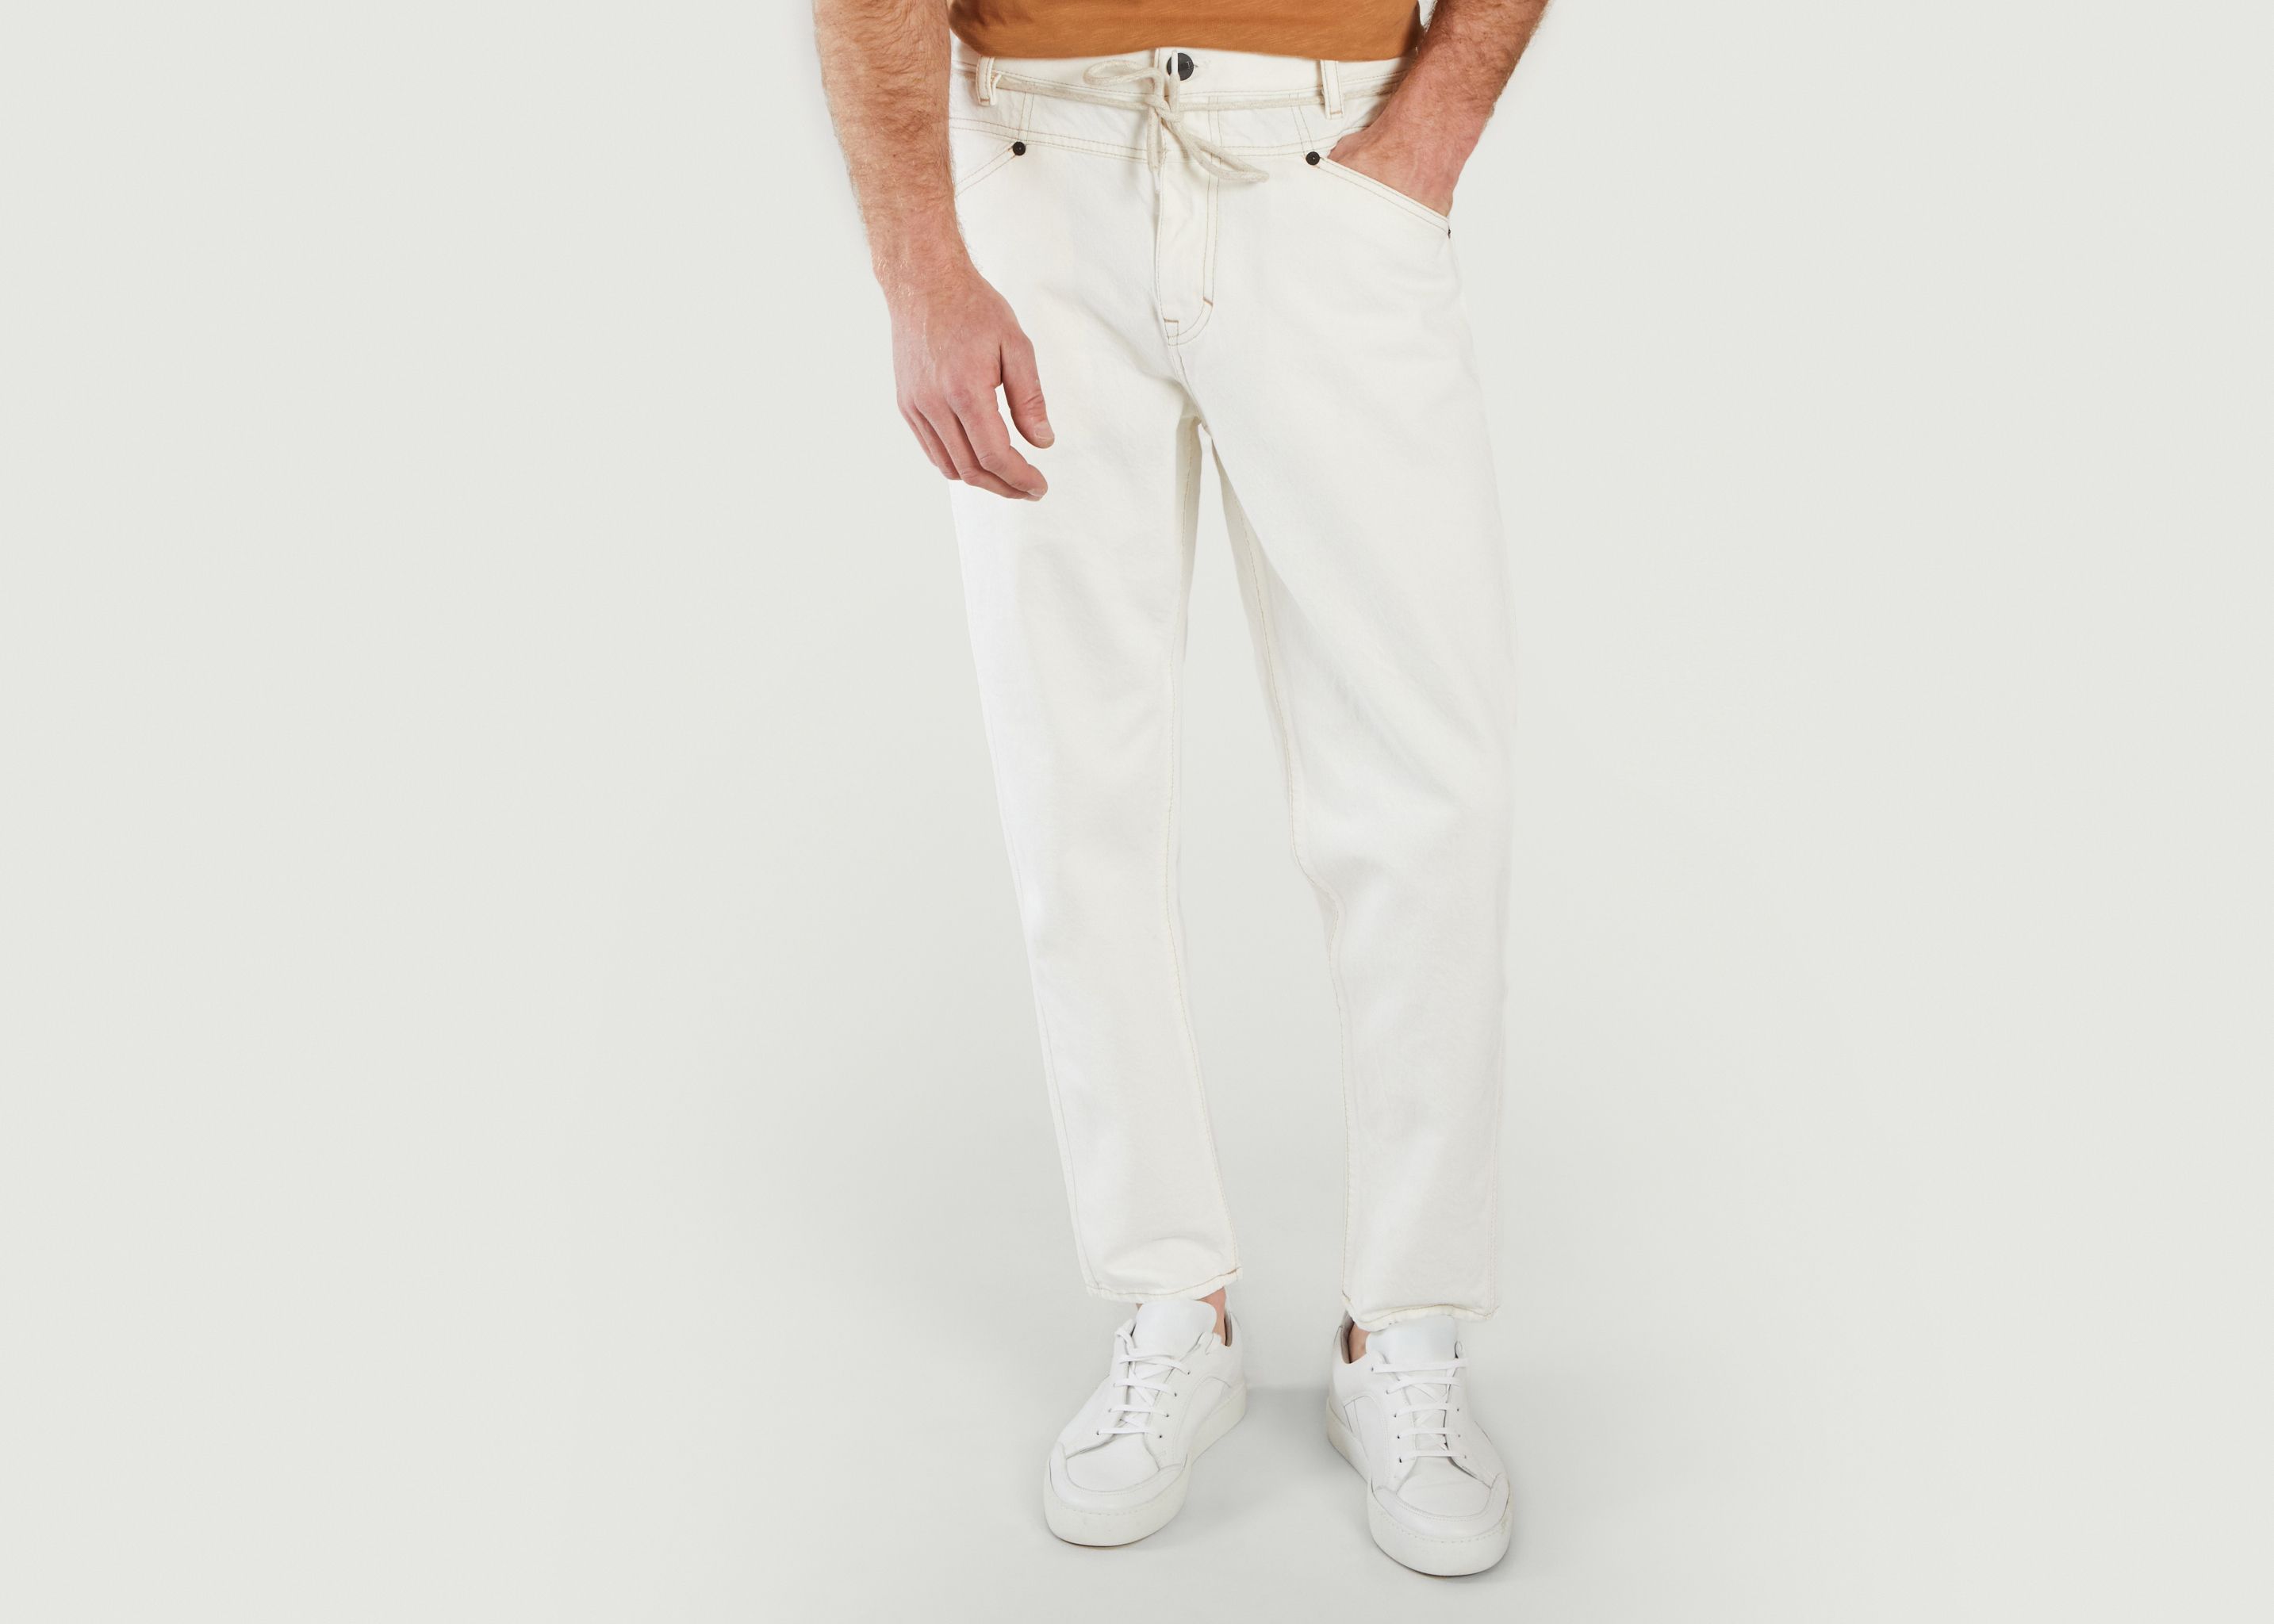 X-Pocket Jeans in organic cotton - Closed